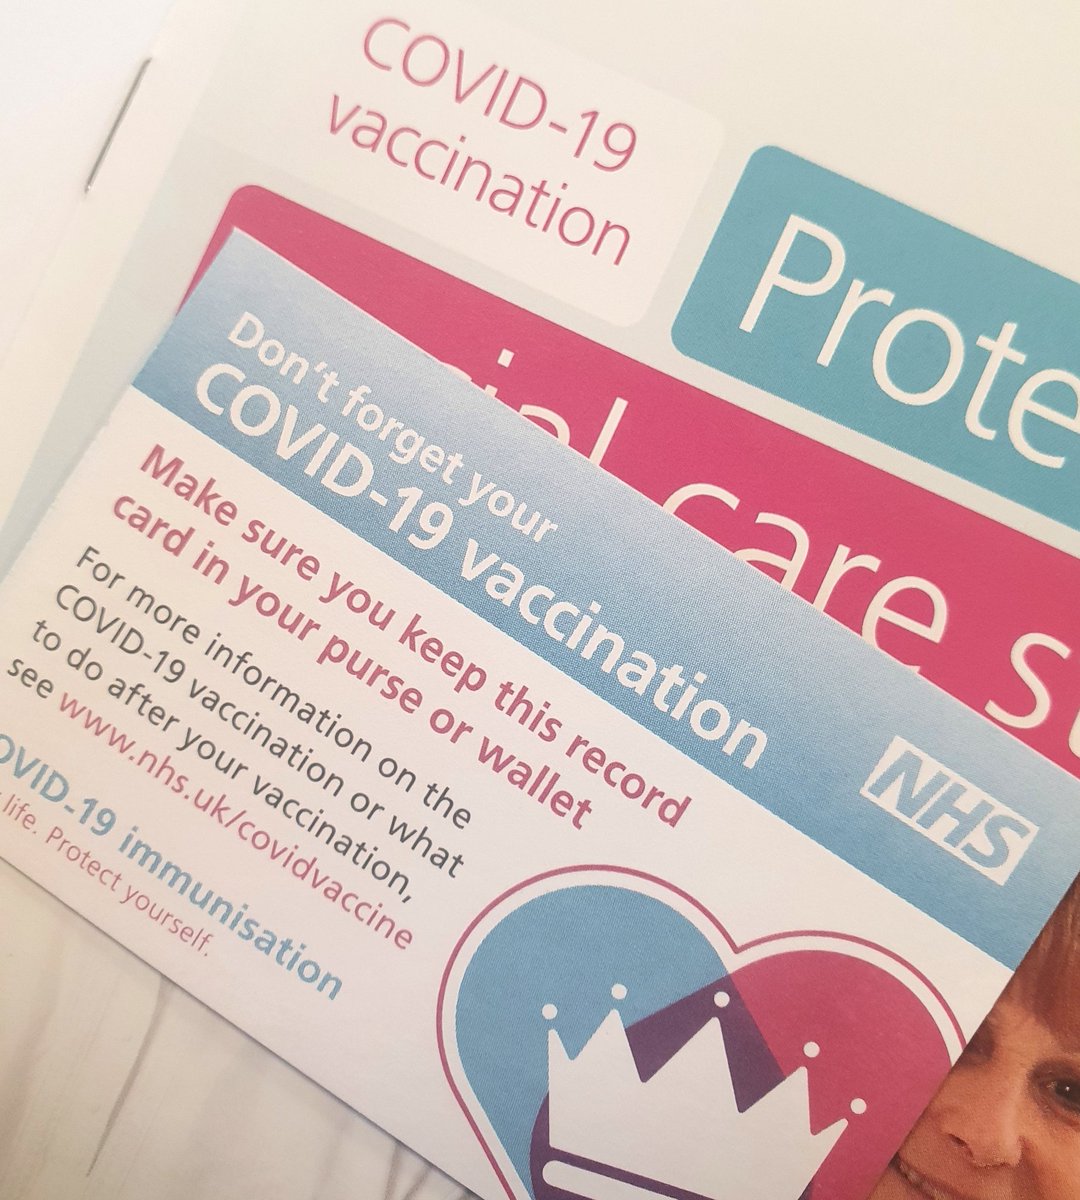 #COVID19 #PfizerBioNTech #CovidVaccine received this morning! 💉🦠

Needless to say, I'll still be making sure I follow the rules!

#StayAtHomeSaveLives #HandsFaceSpace

#WearAMask!!!